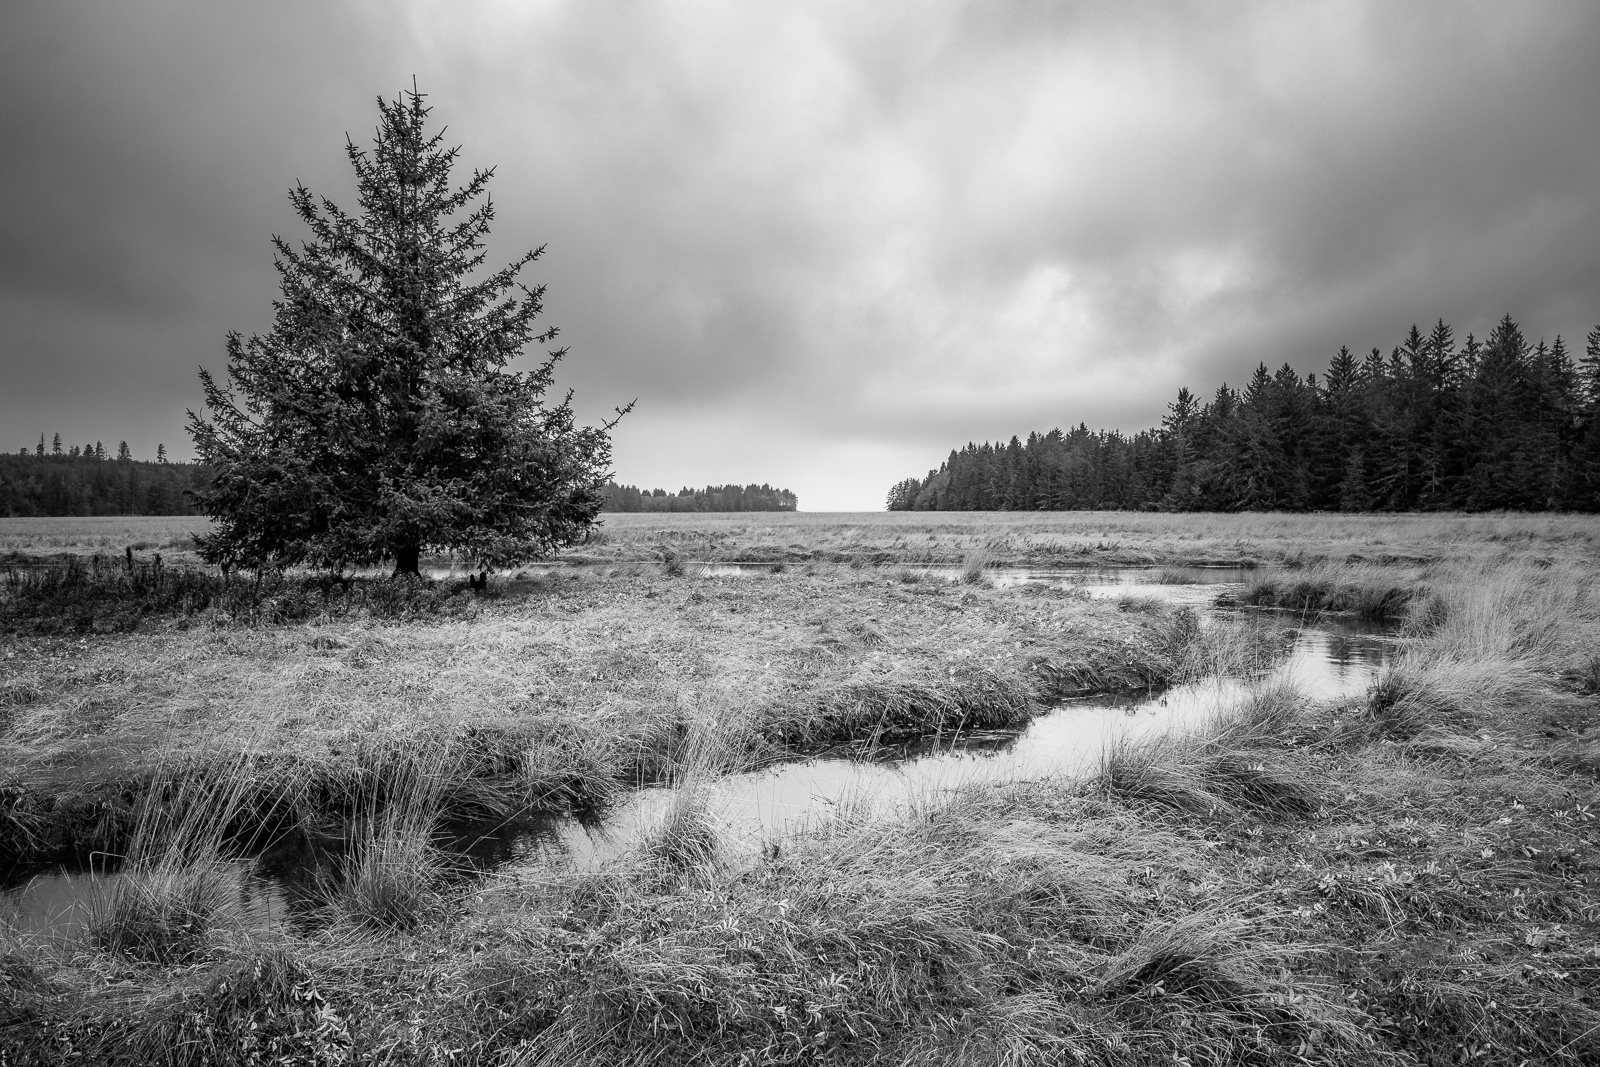 A black and white landscape photograph of the Middle Nemah River estuary along Willapa Bay in rural Pacific County, Washington.